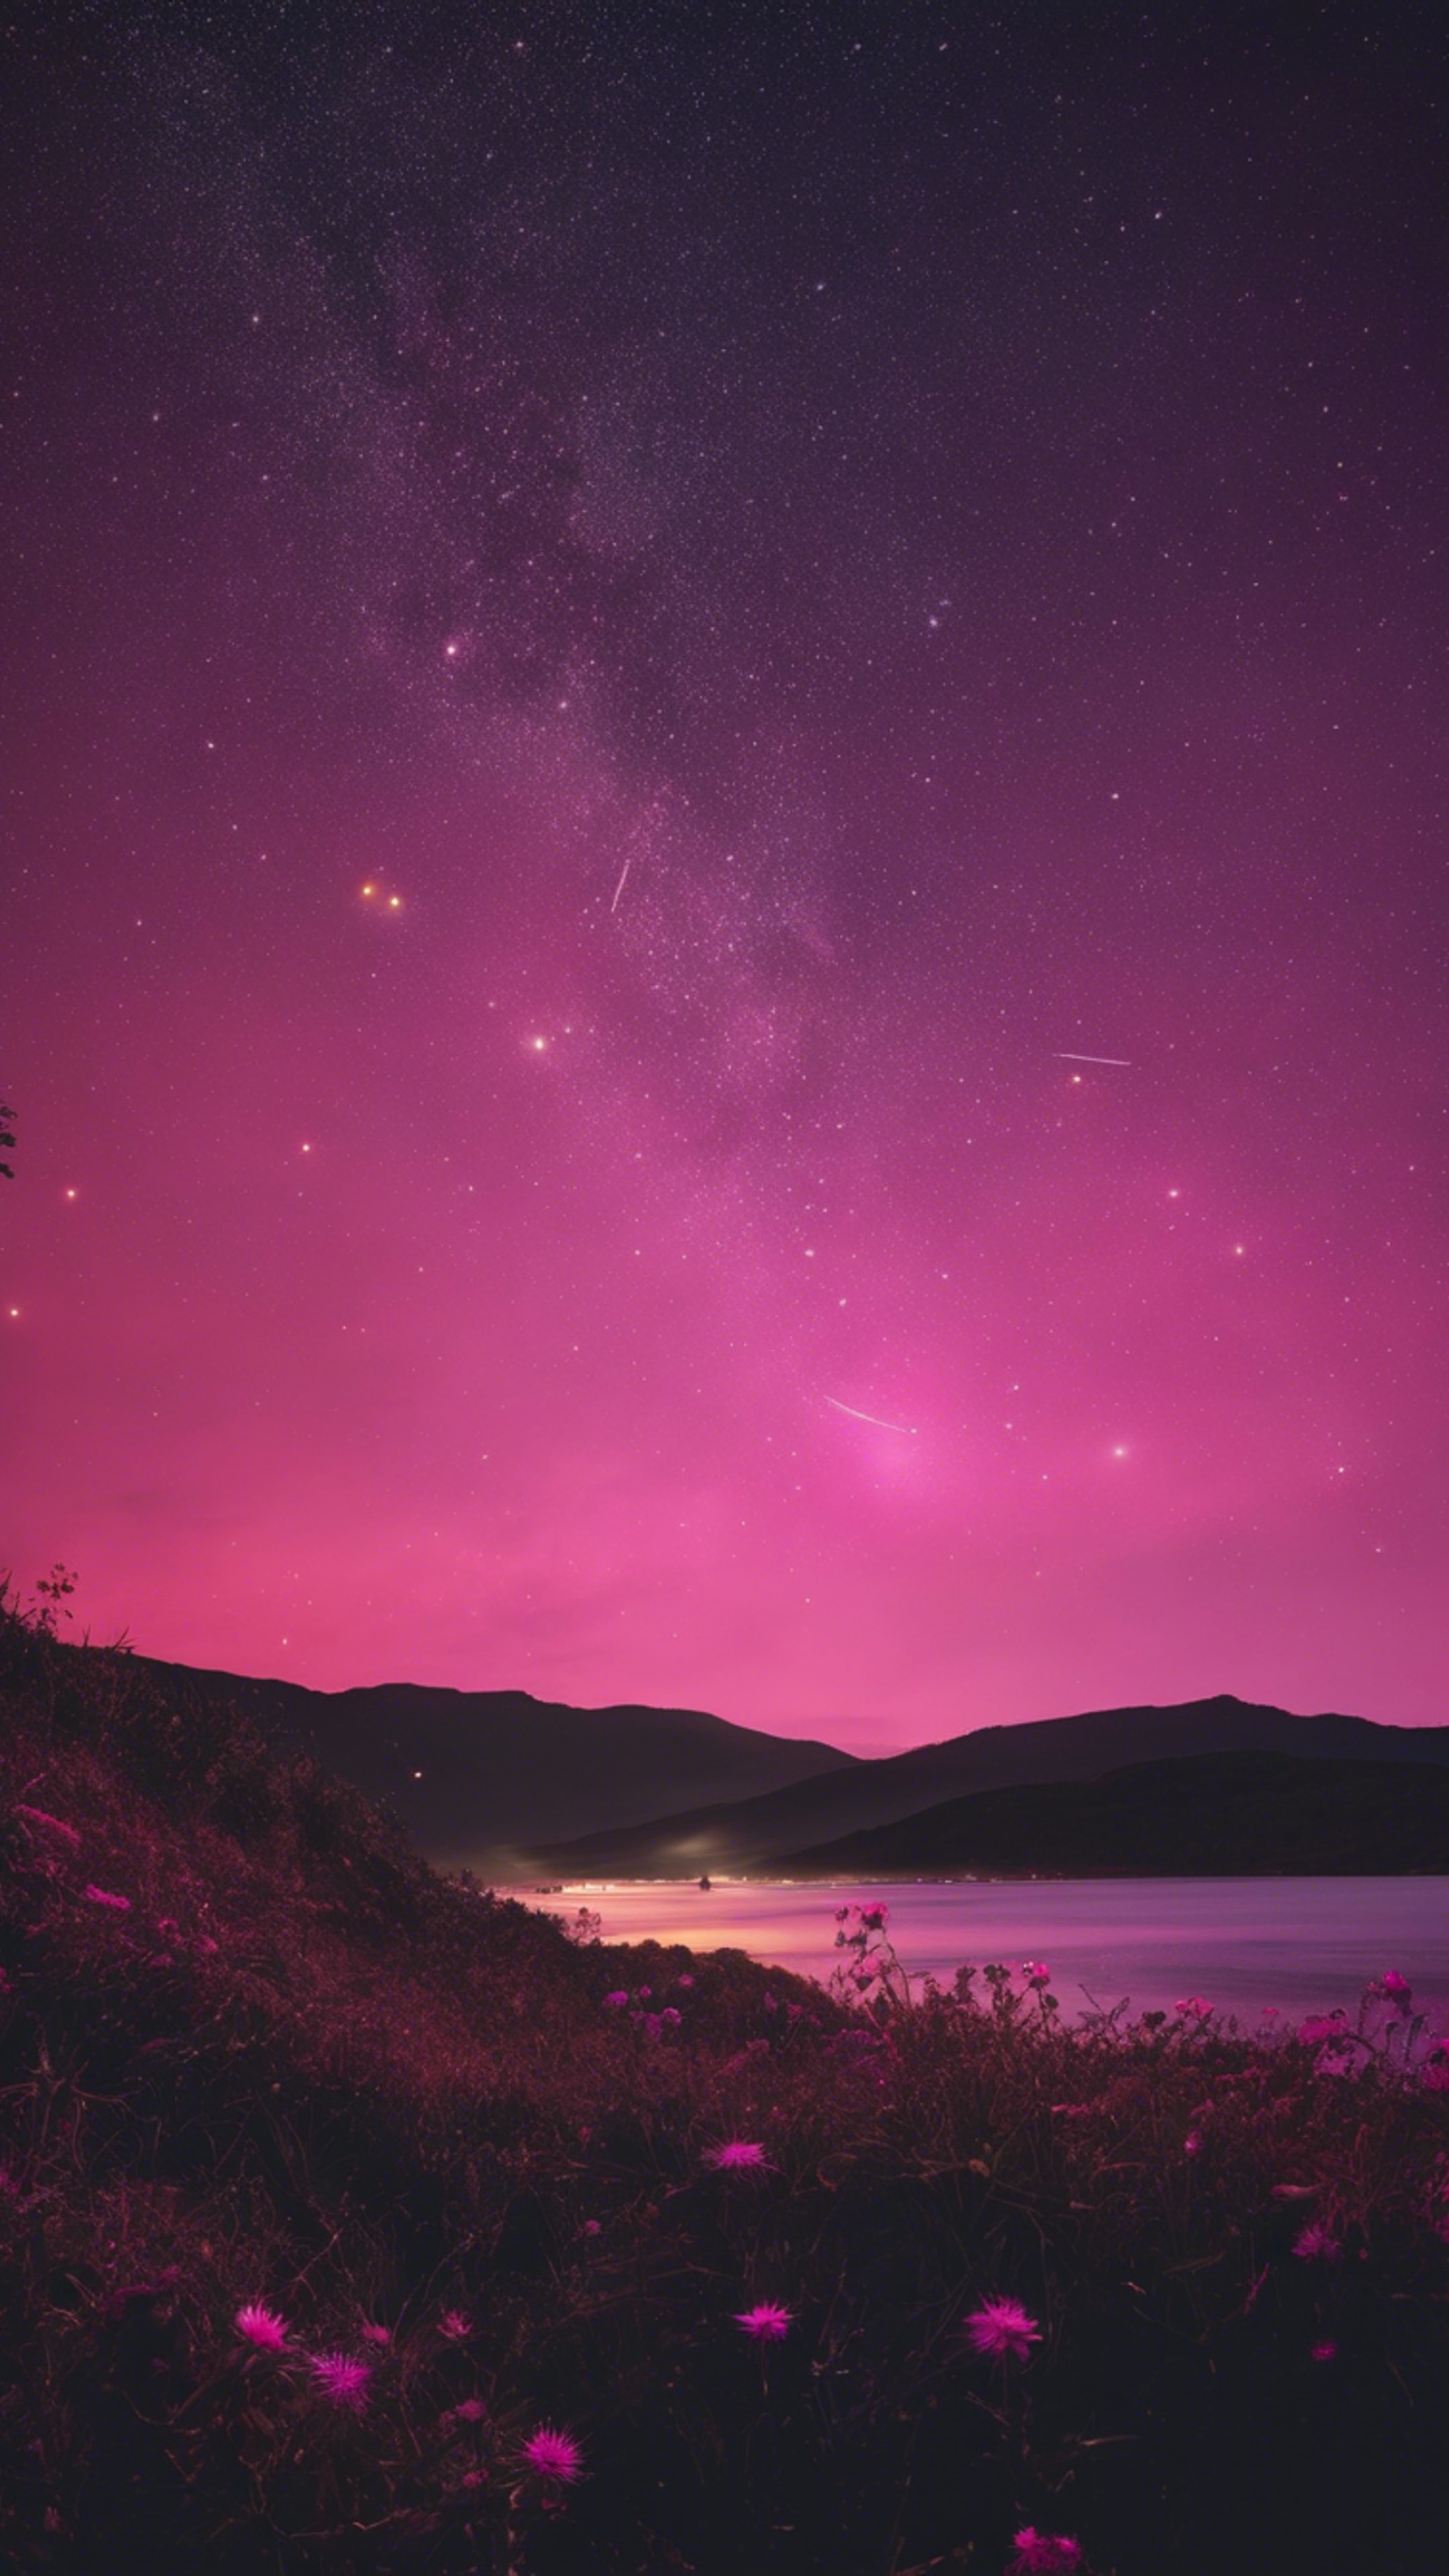 A shooting star glowing in a vibrant pink as it crosses the dark night sky. Taustakuva[c8fce7a9134e4e29a83b]